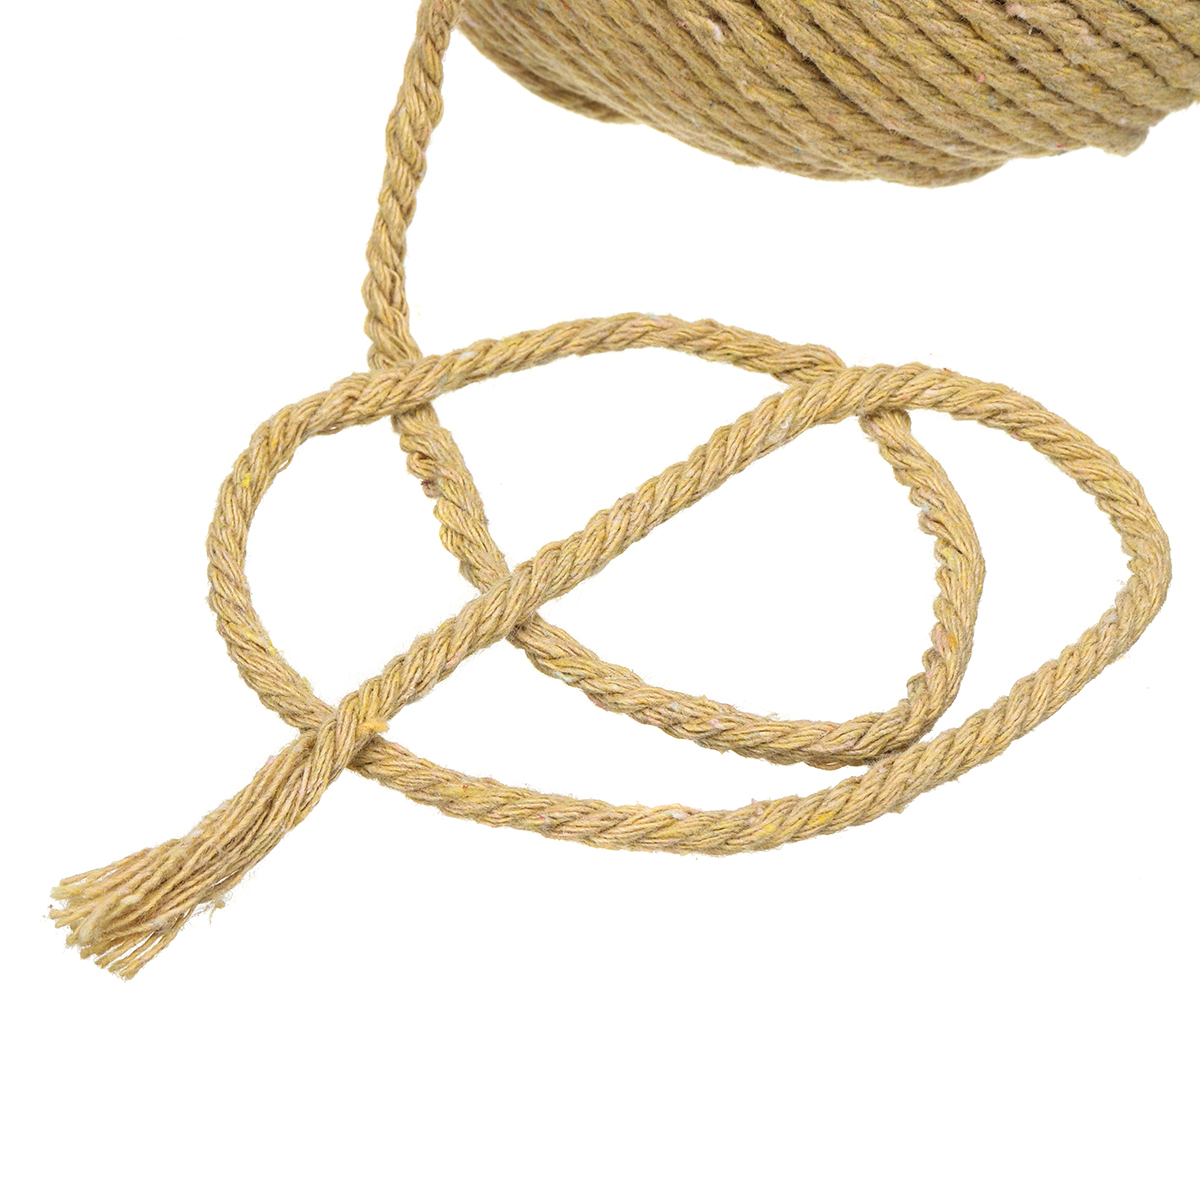 4 Colors 4mm 110m Natural Cotton Twisted Cord Rope Macrame Linen Jute DIY Braided Wire Hand Craft